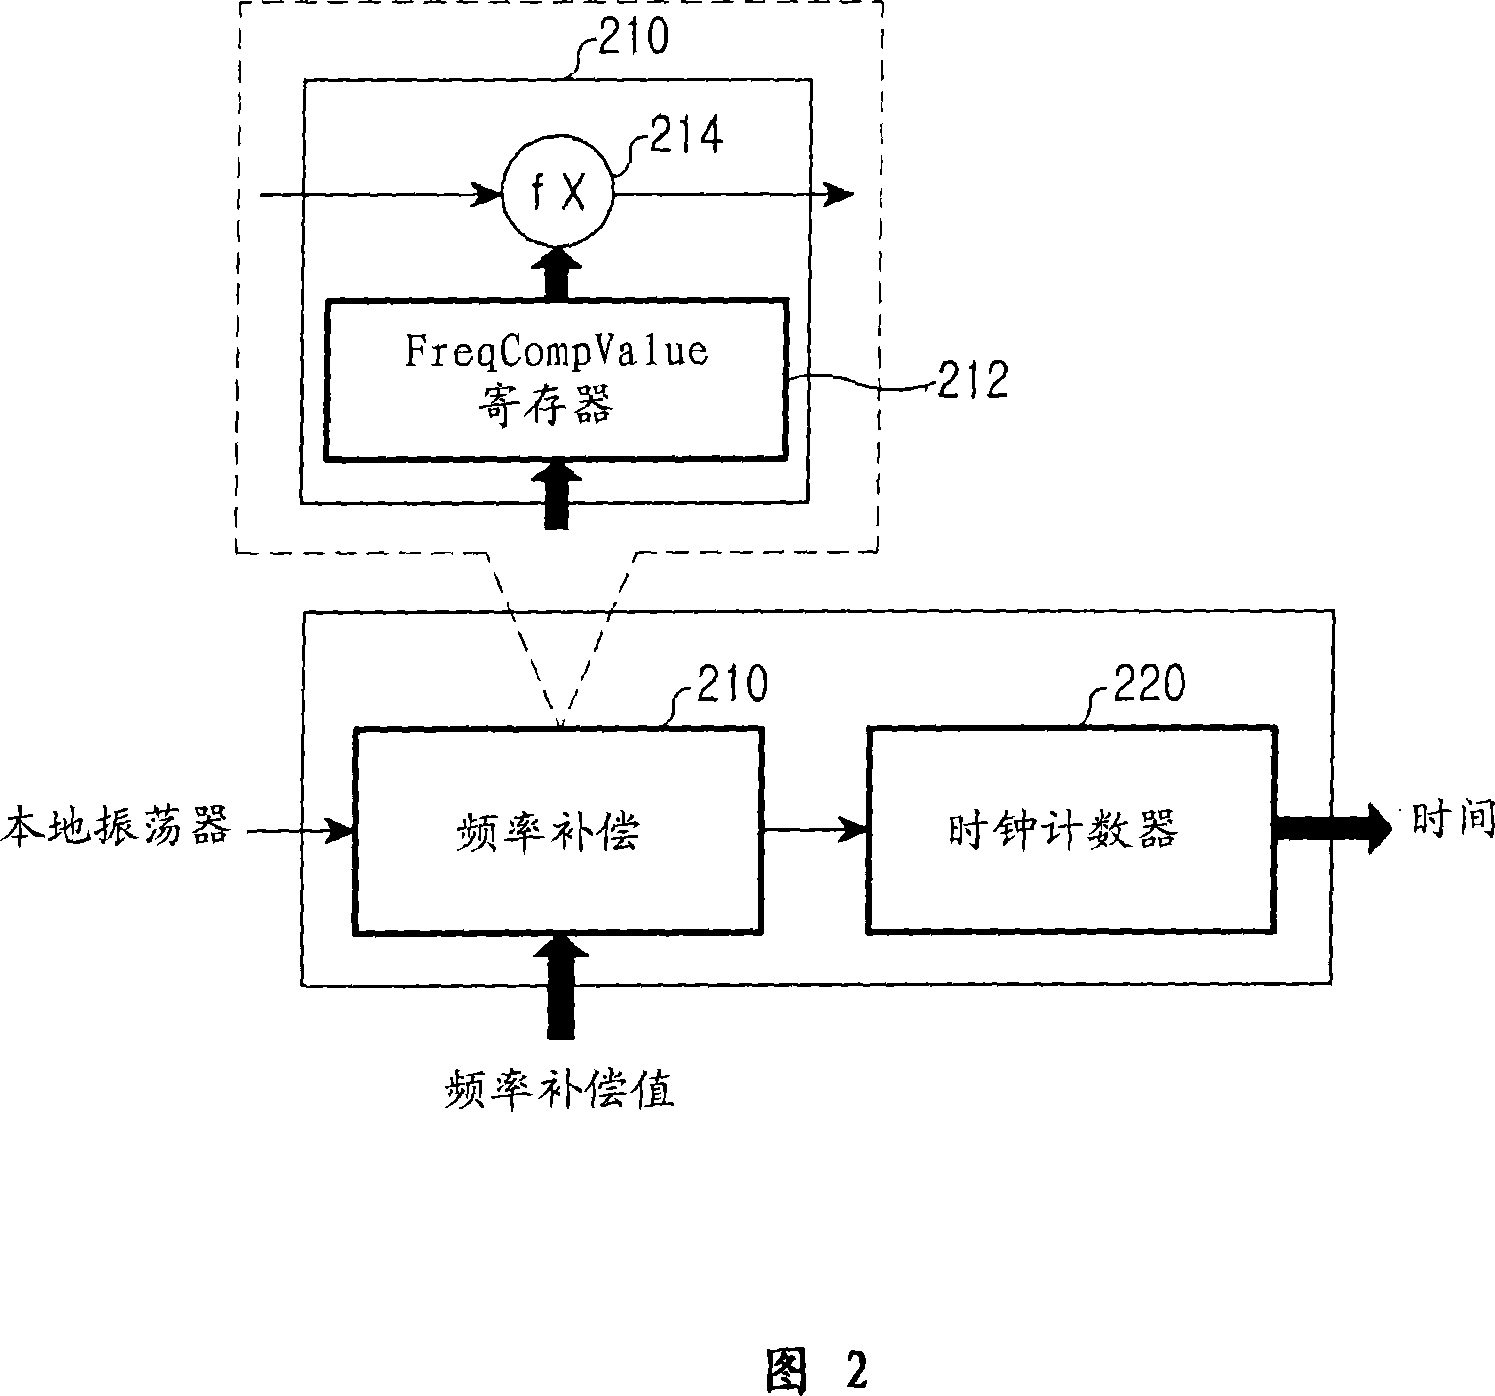 Method for time synchronization in distributed control system